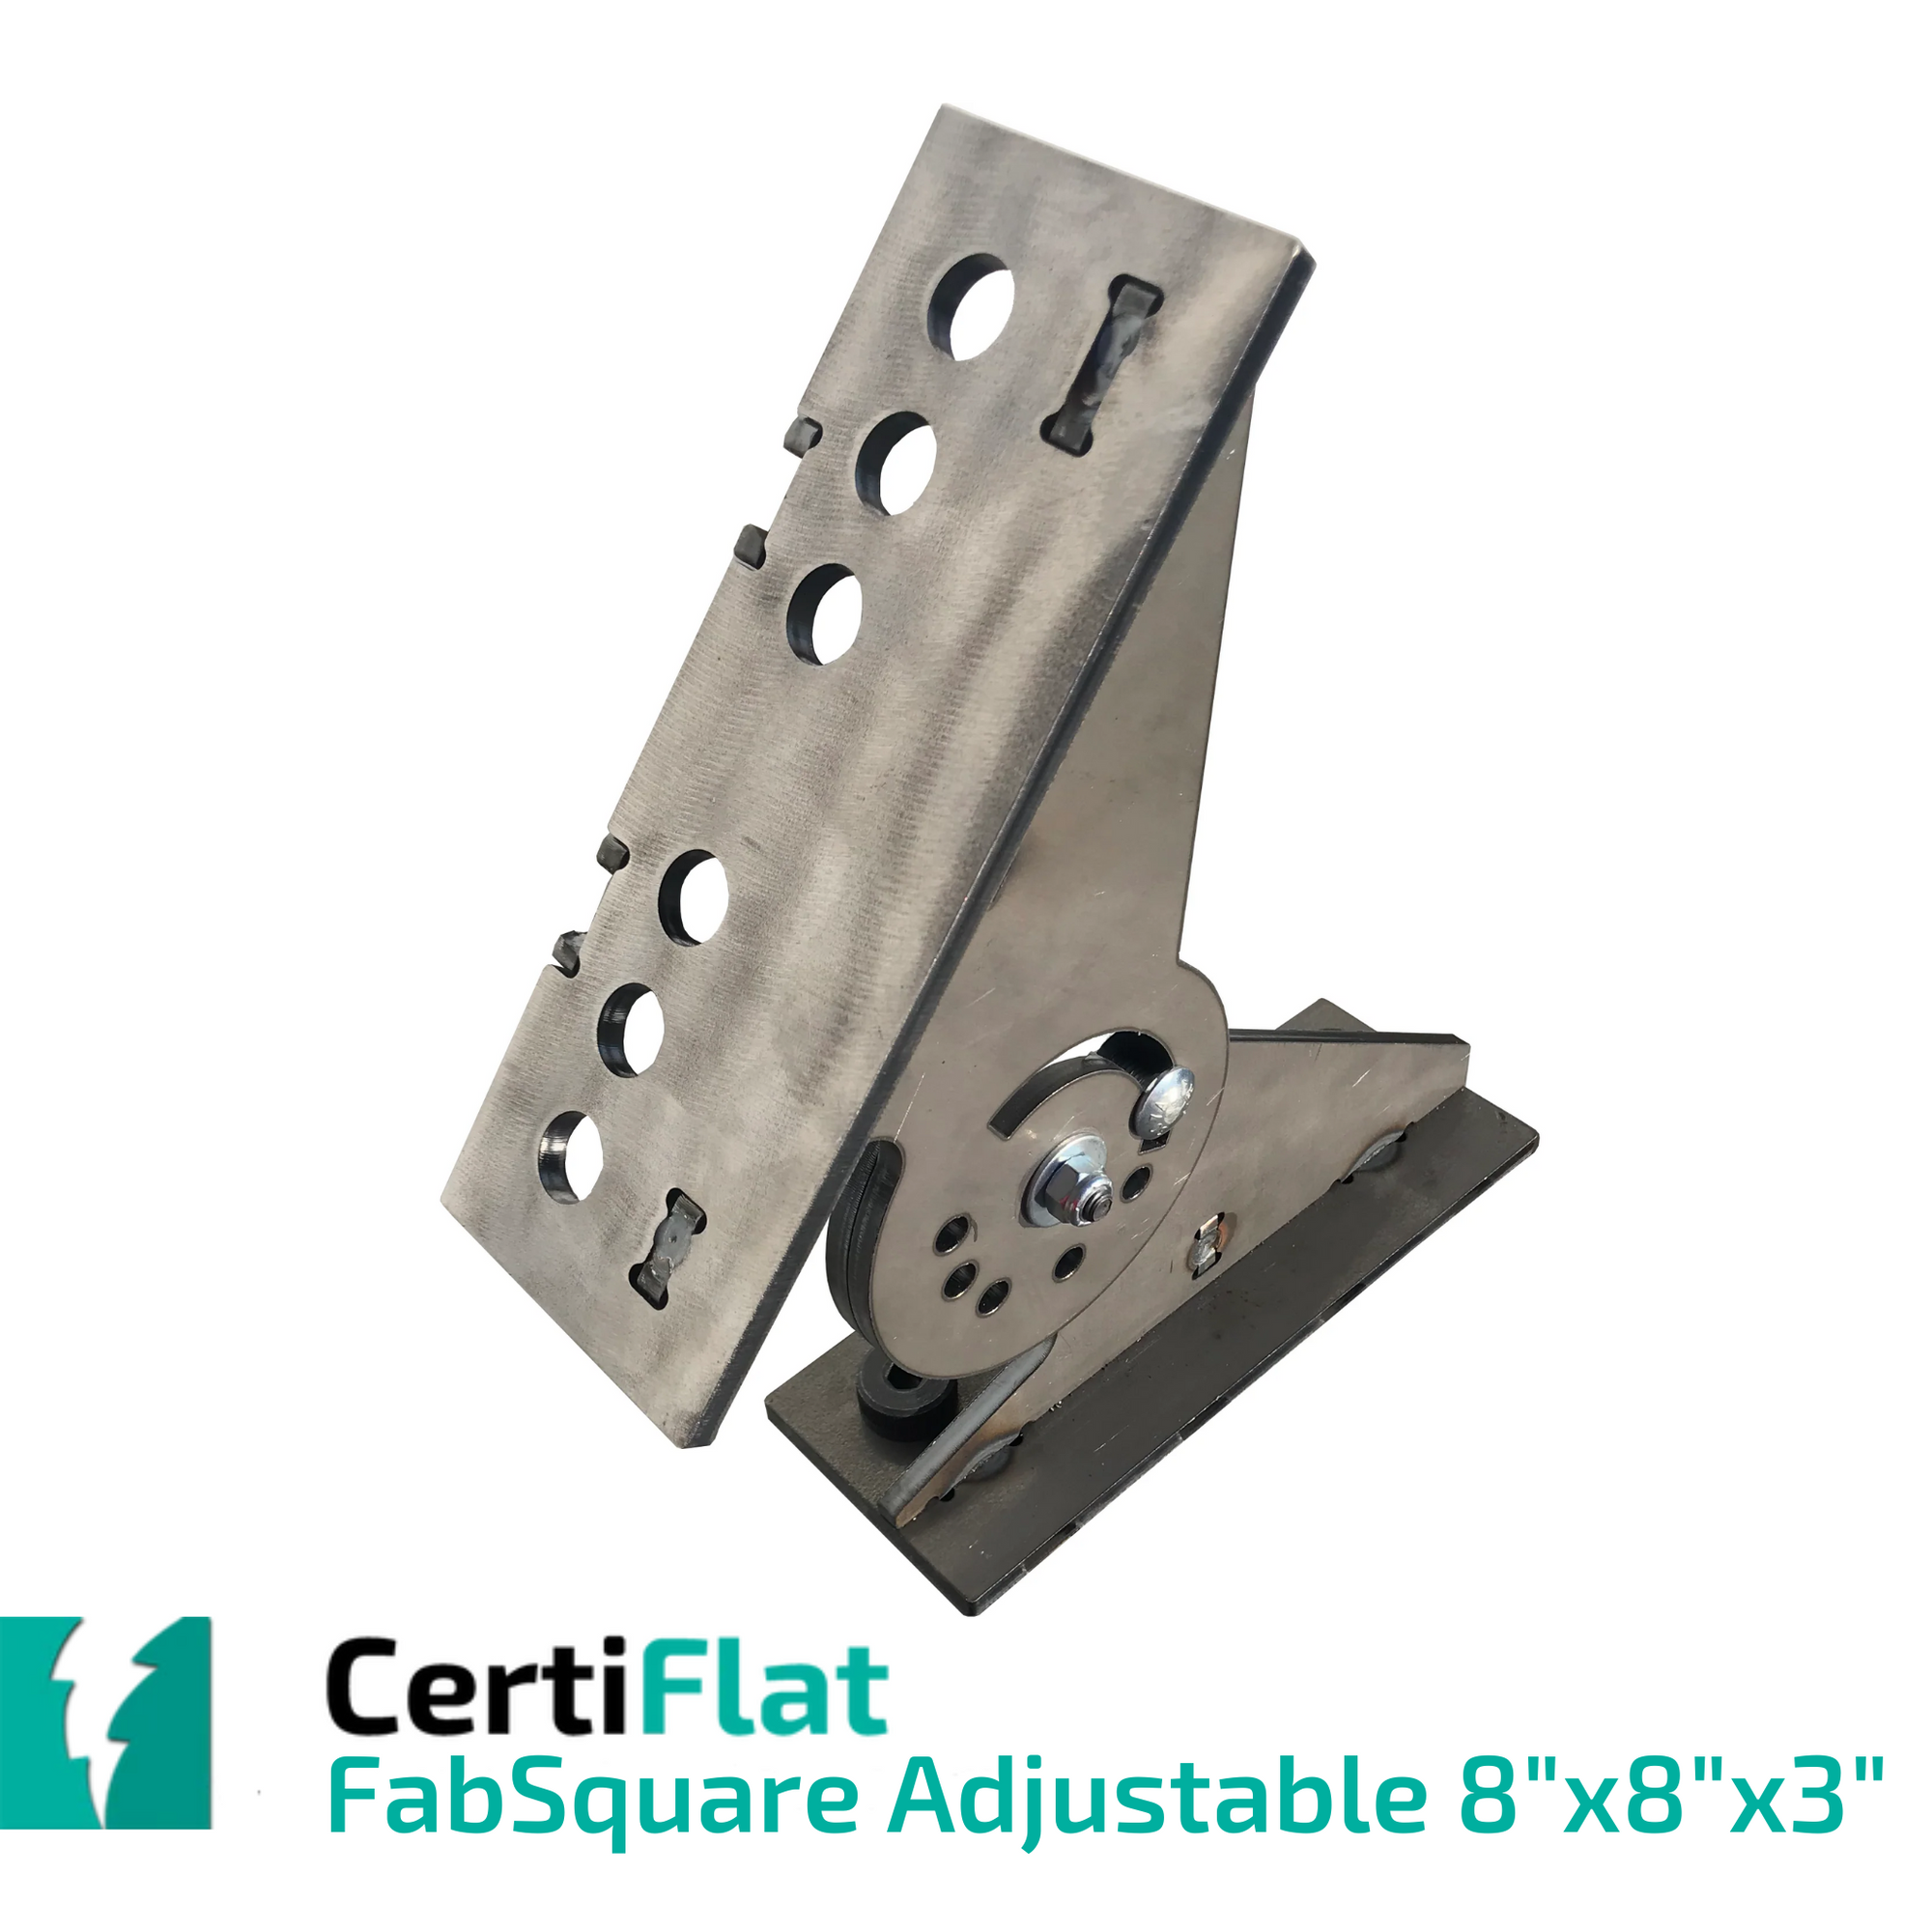 CertiFlat 8"X8"X3" Adjustable FabSquare - AFS88